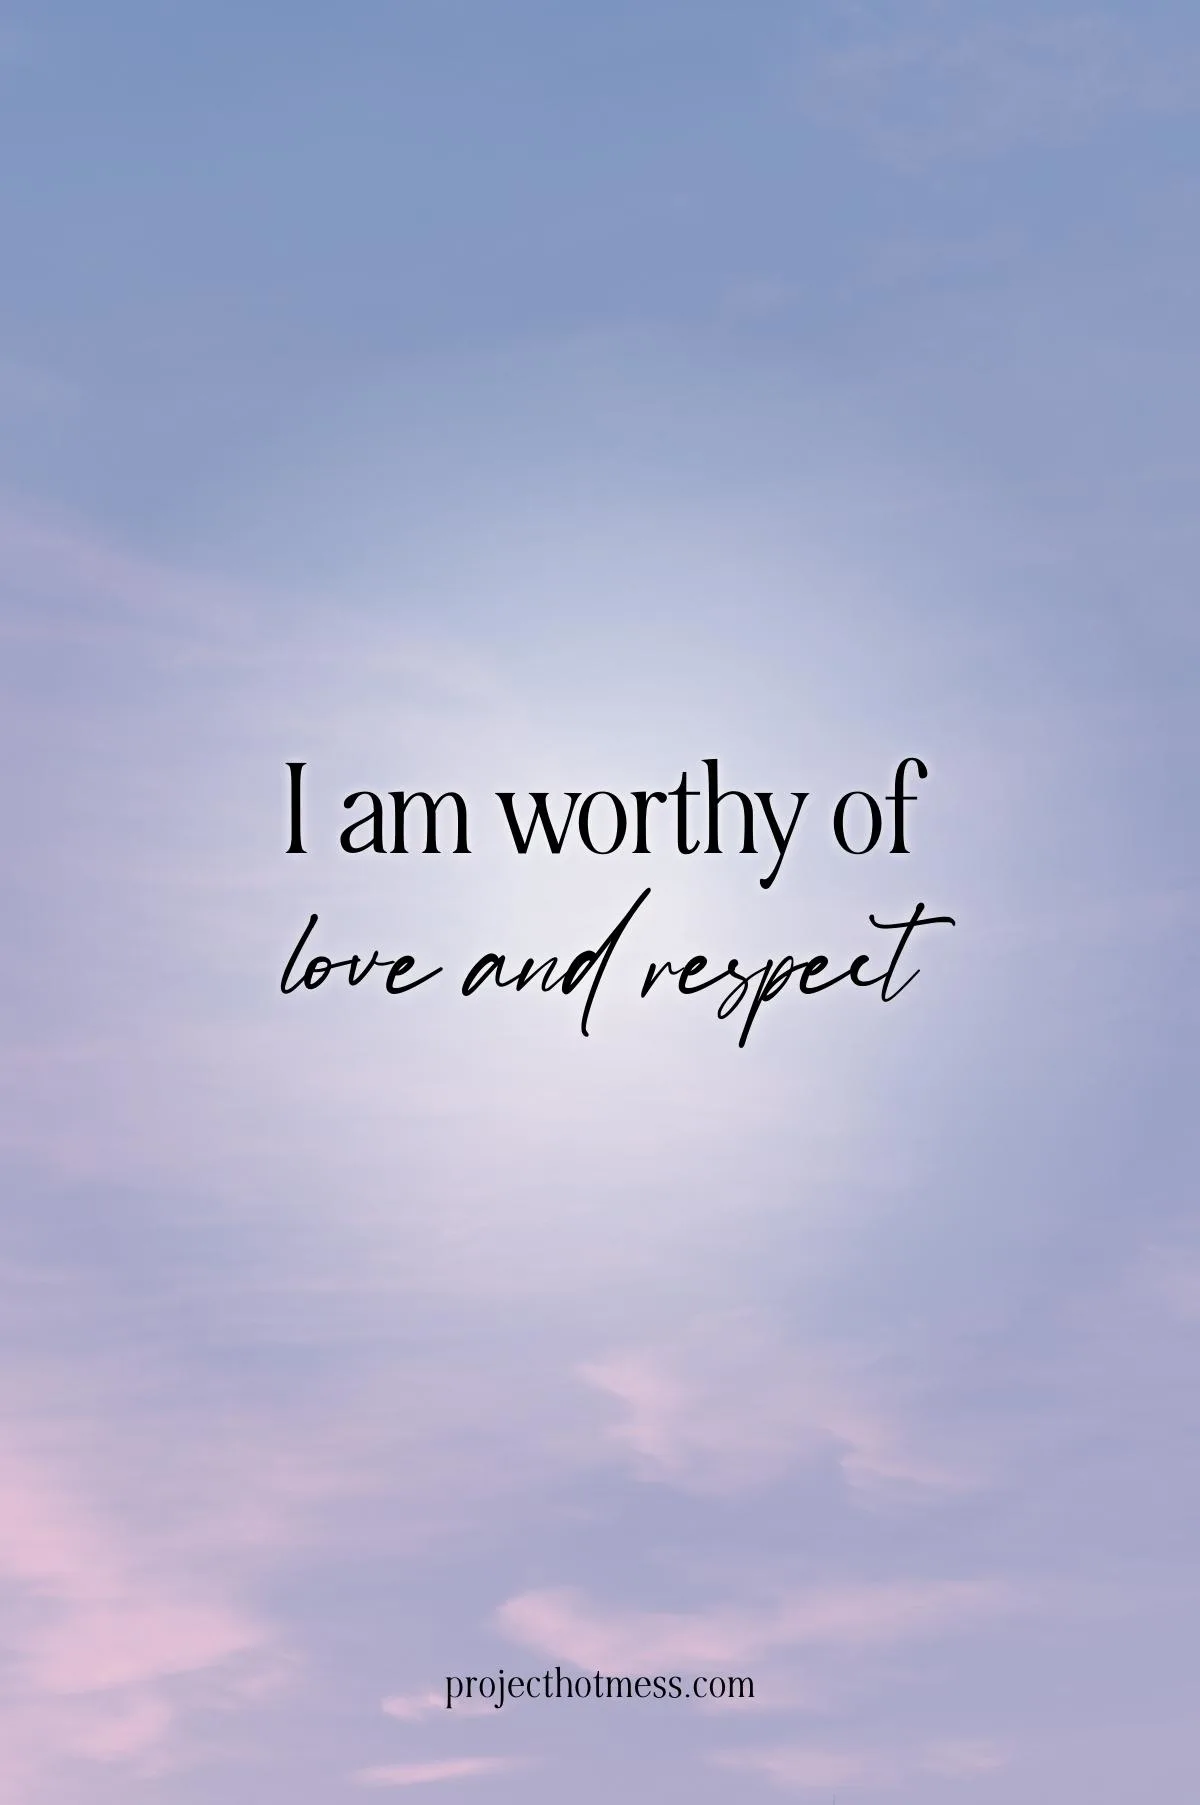 Ready to start embracing self-love and inner strength? Check out our list of 111 affirmations for self worth and start incorporating them into your daily routine for a happier, healthier life.